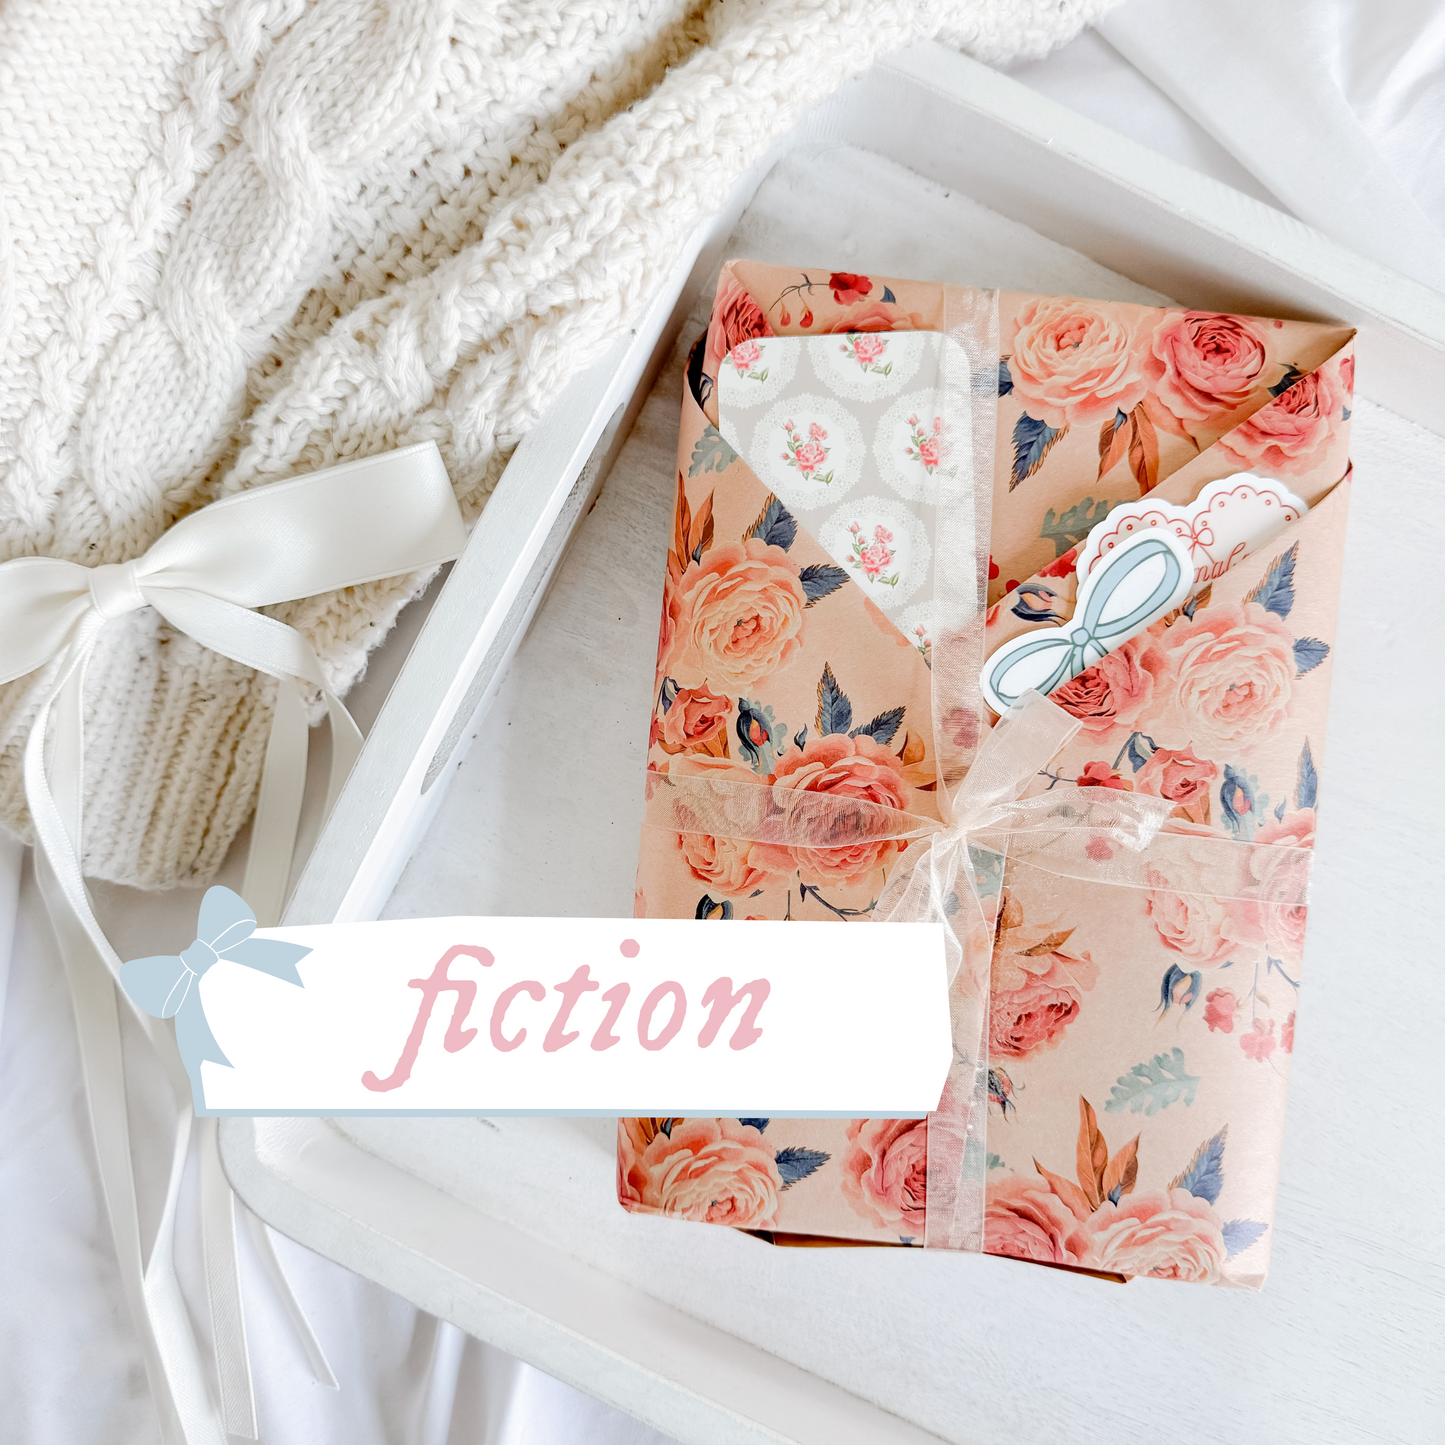 Blind Date With A Book *Fiction*